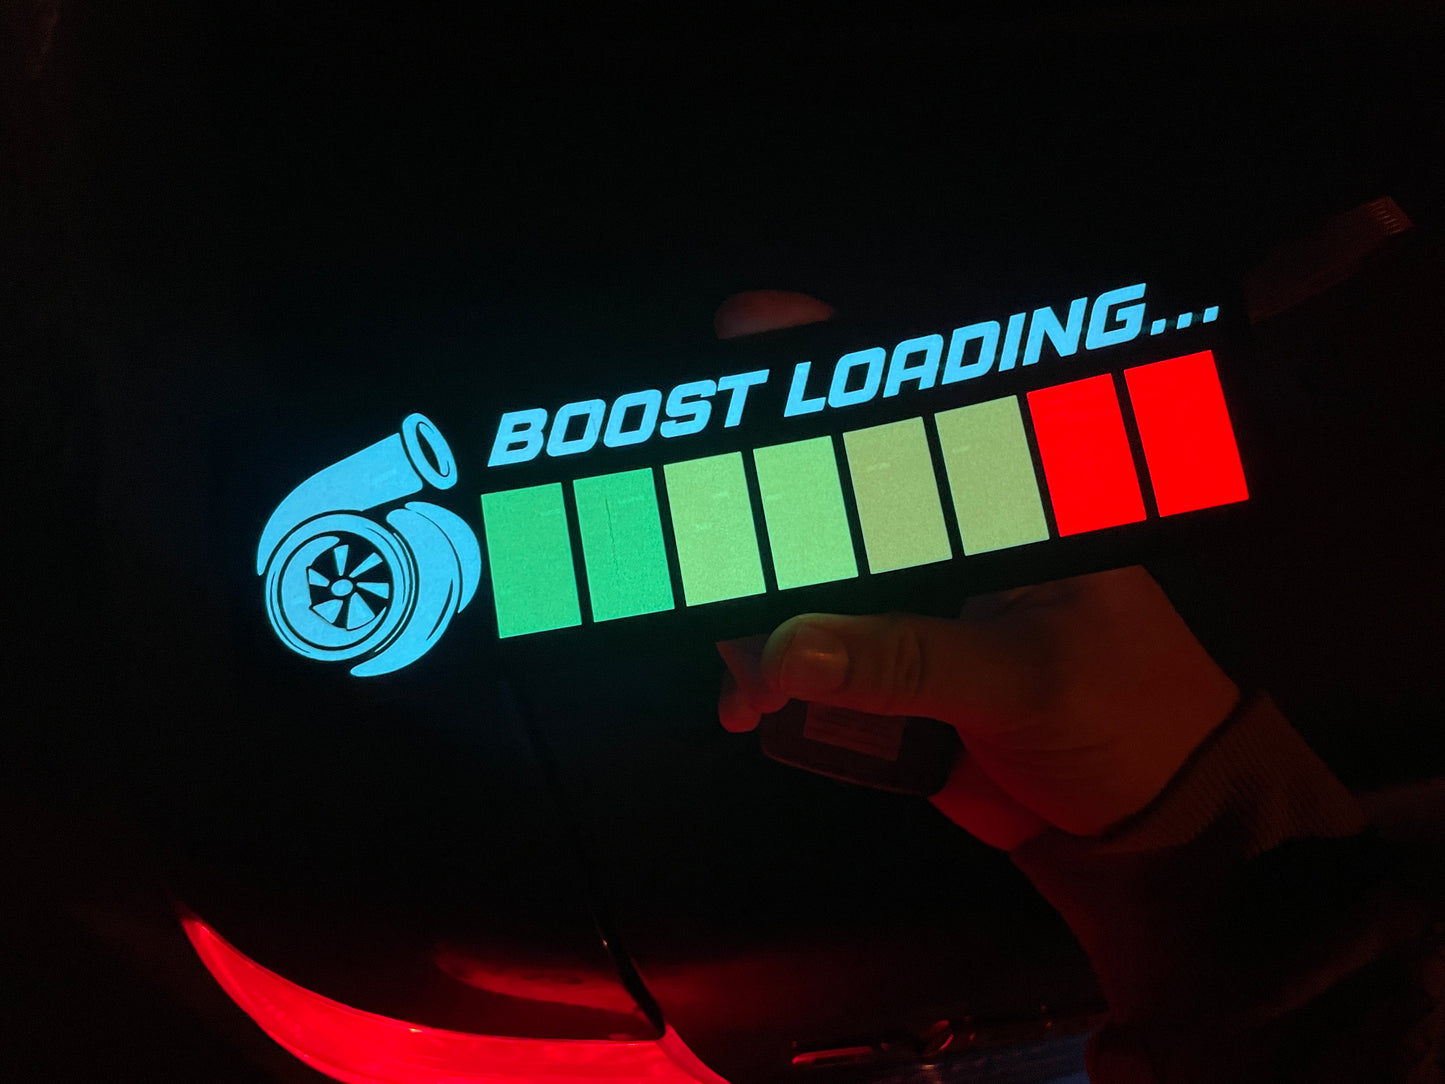 Boost Loading Electric Car Sticker by CutNinja™ - SPALAH - Collection of Glowing Led Stickers